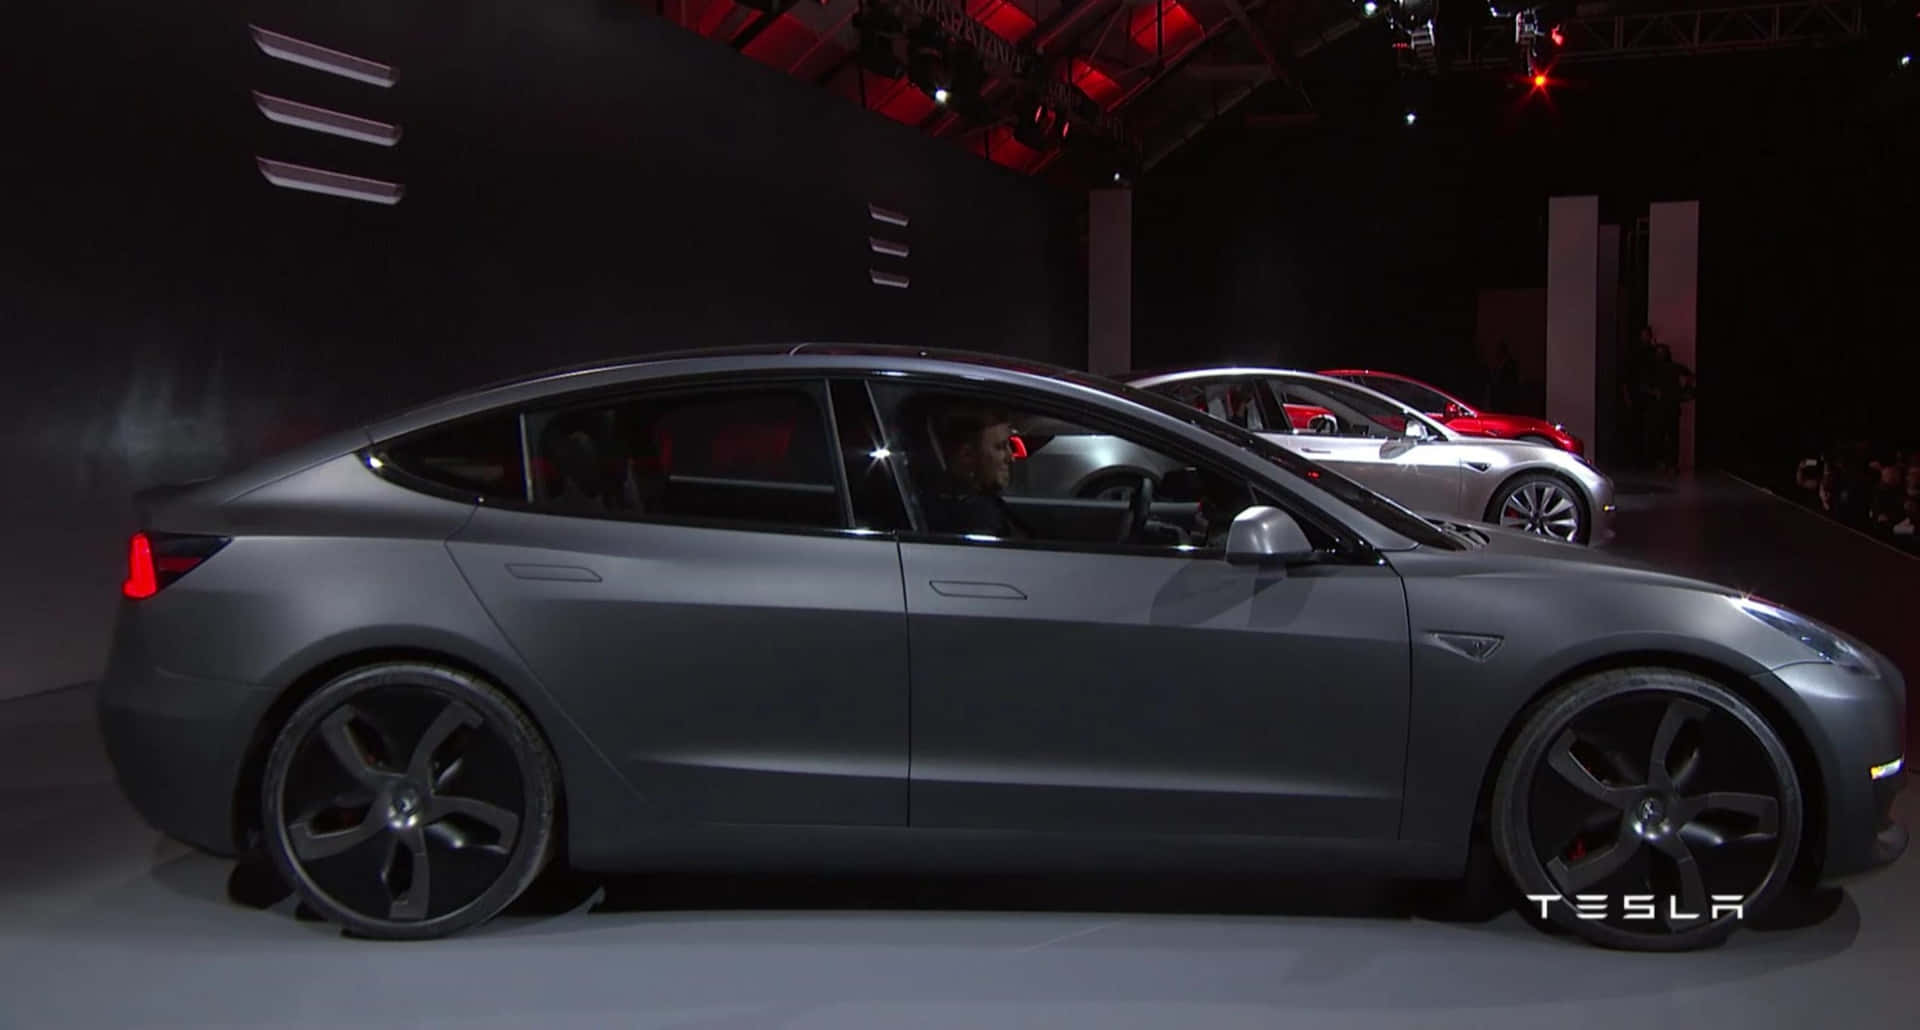 Tesla Model 3, the future of electric cars